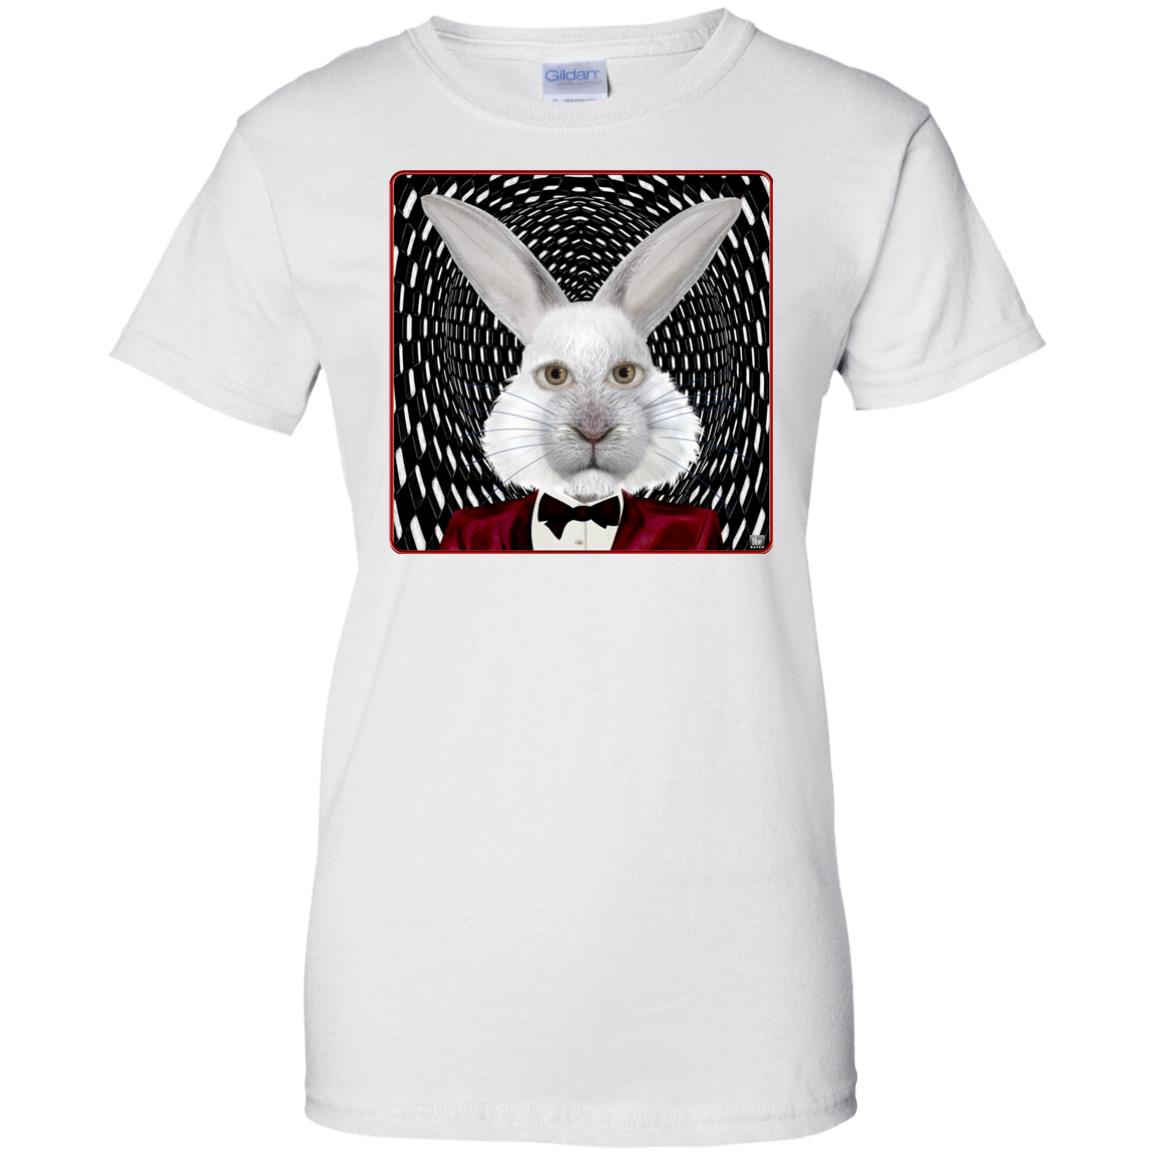 the white rabbit - Women's Relaxed Fit T-Shirt